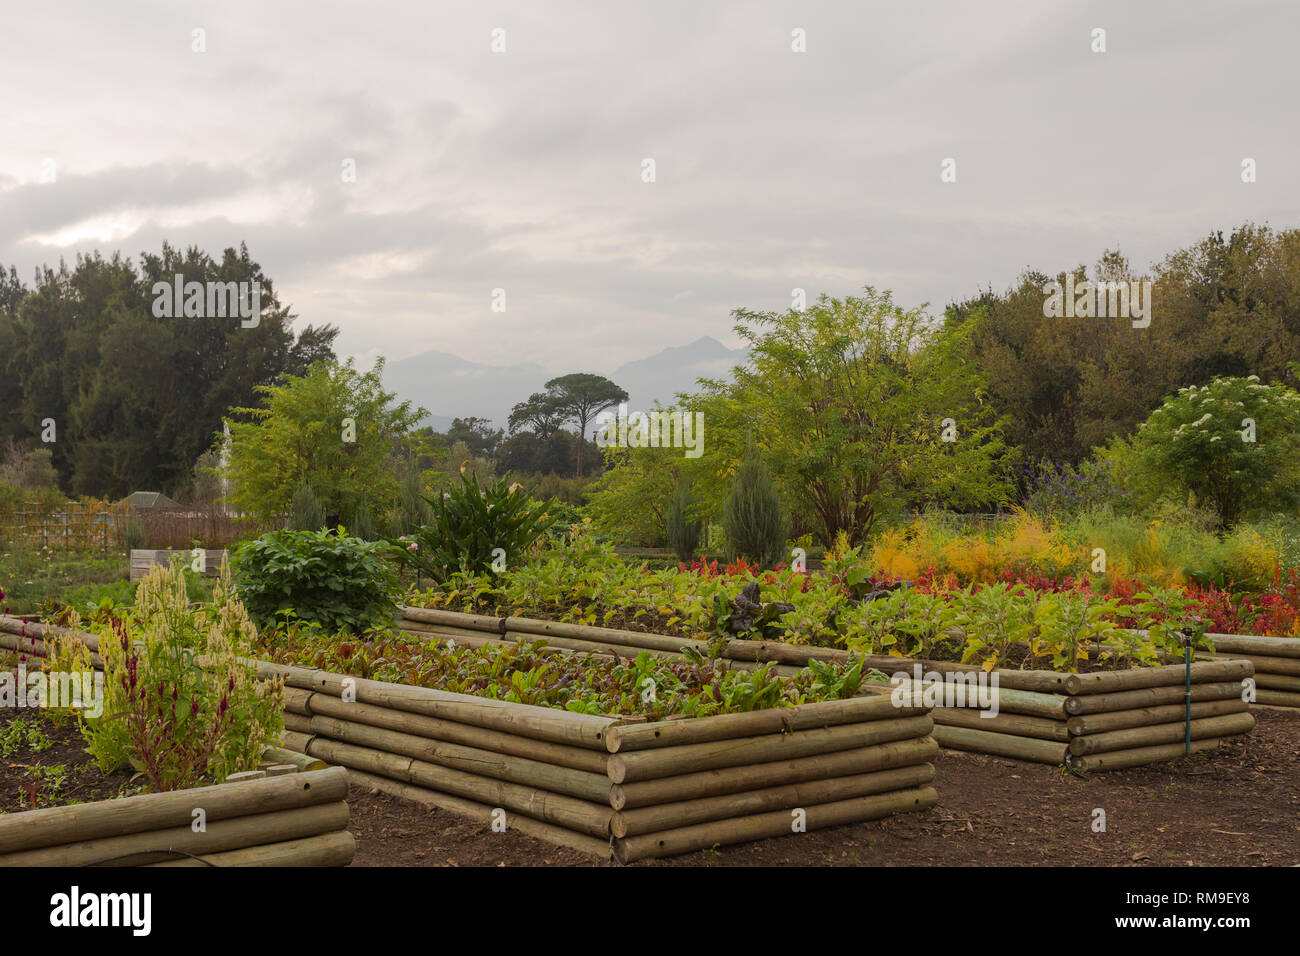 food and kitchen garden in raised wooden beds producing fresh produce for the restaurants at Boschendal wine estate, Cape Winelands, South Africa Stock Photo